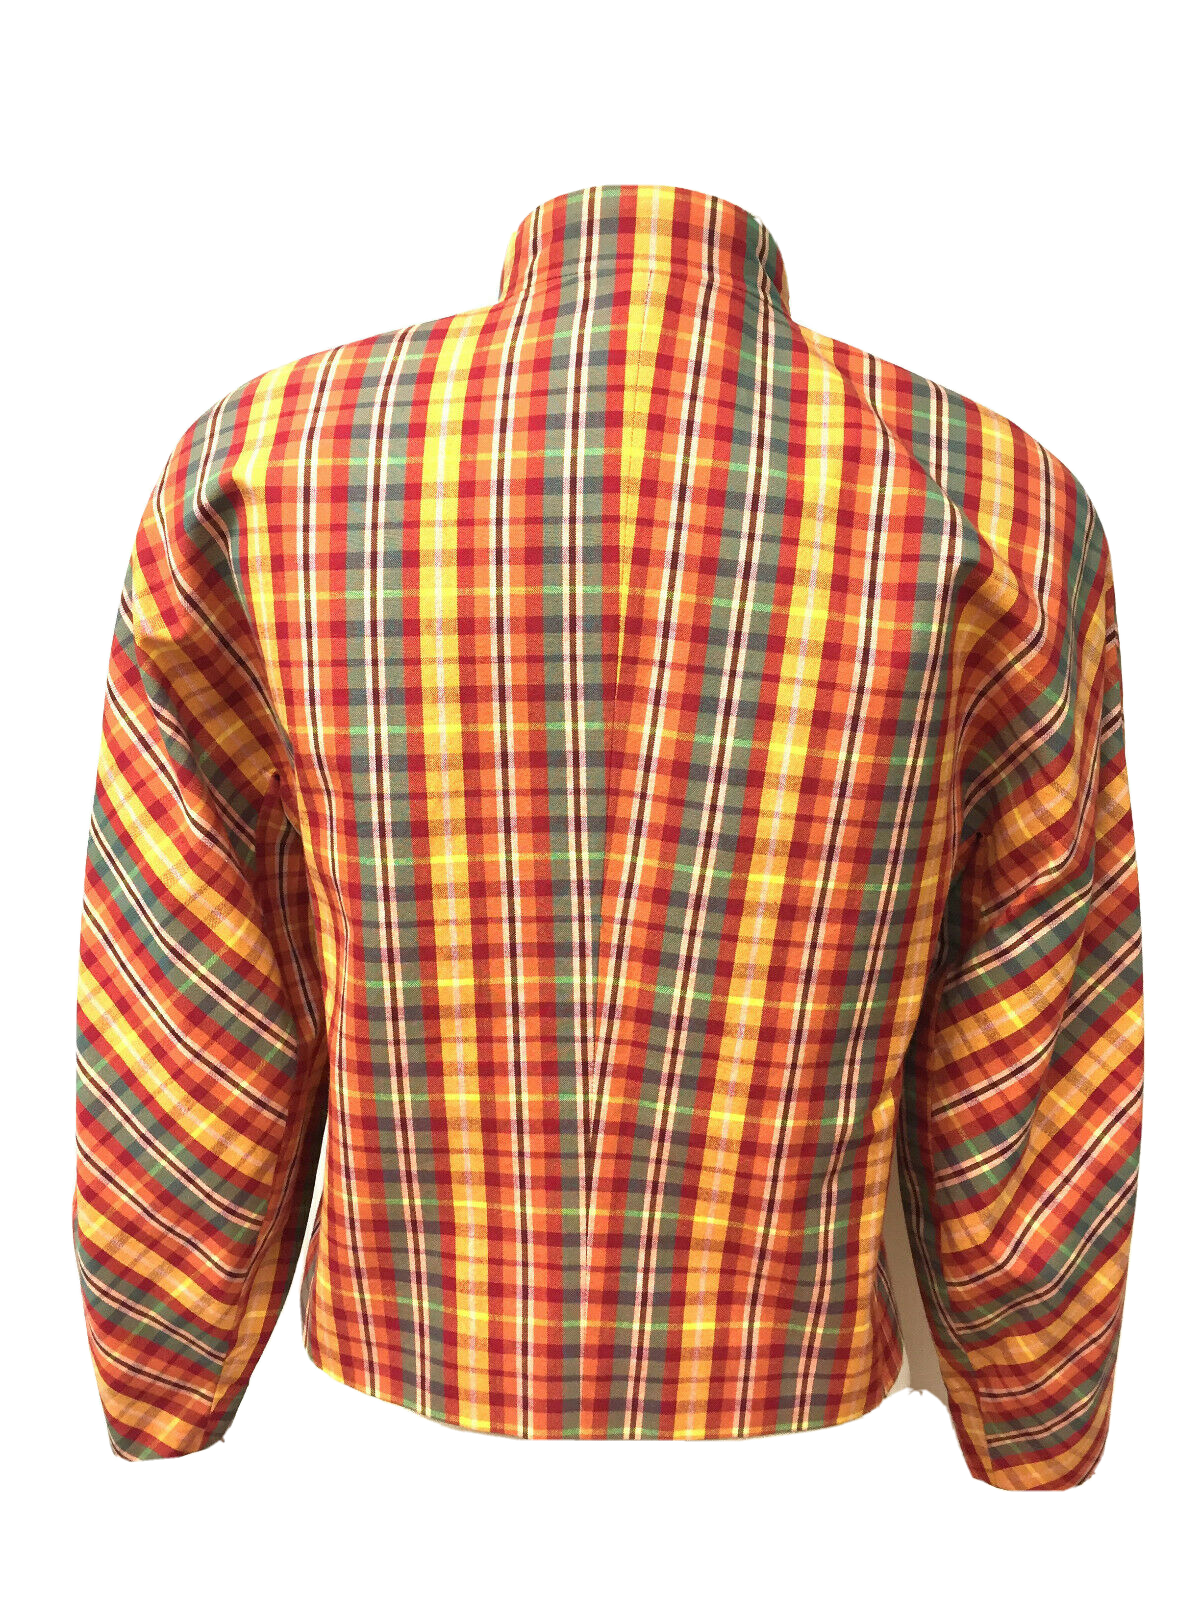 Vintage KENZO Green Yellow Multicolor Plaid Cotton Cropped Jacket SzFR38/US6